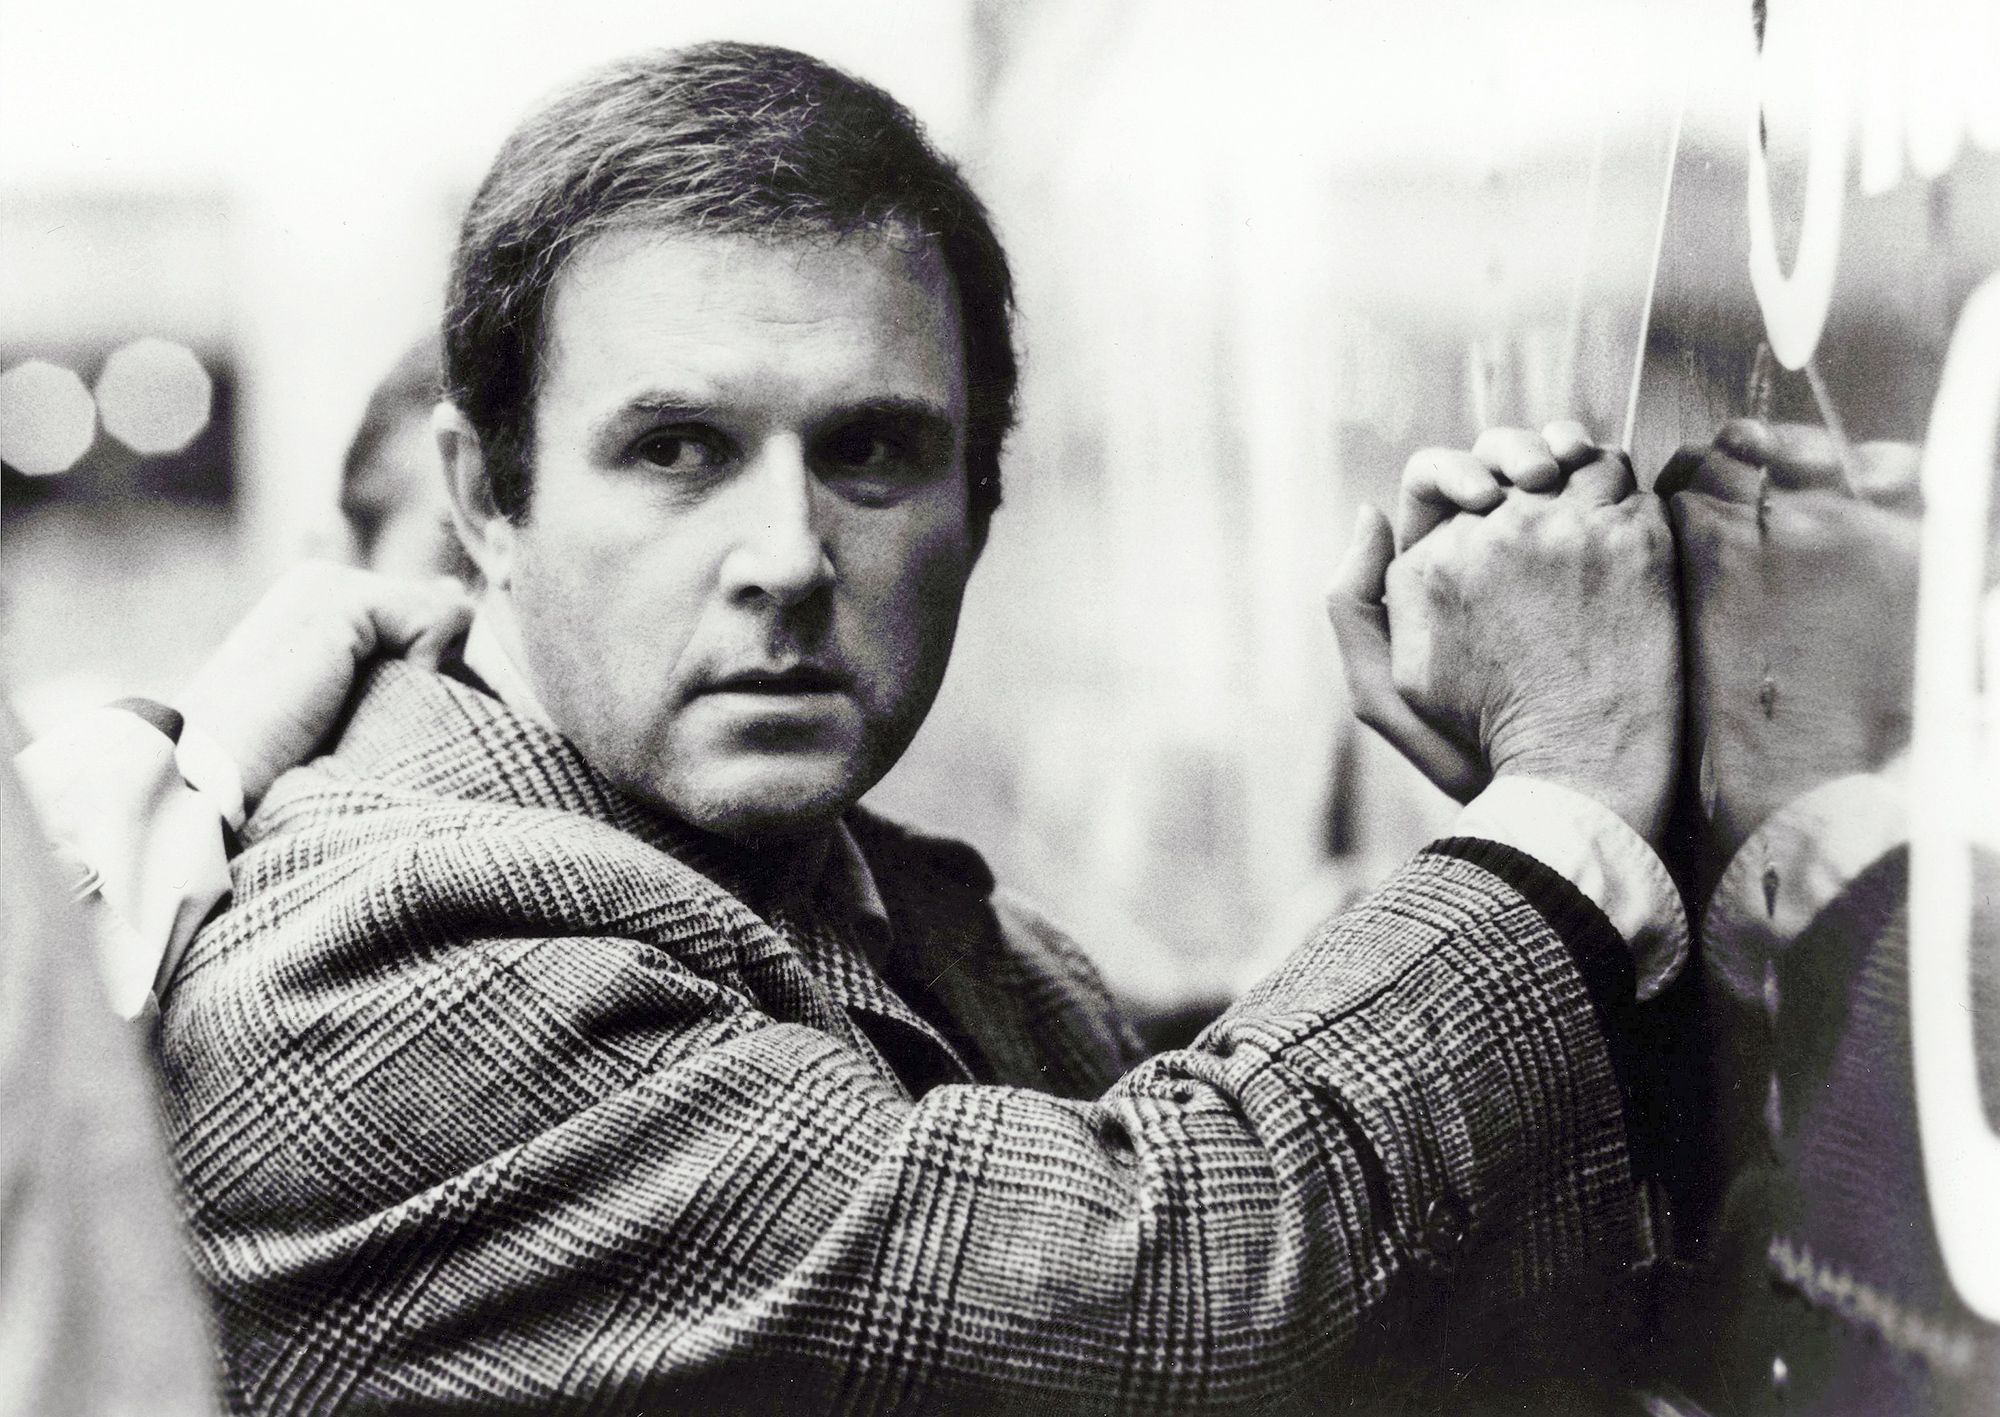 Charles grodin (born april 21, 1935) is an american actor, comedian, author...